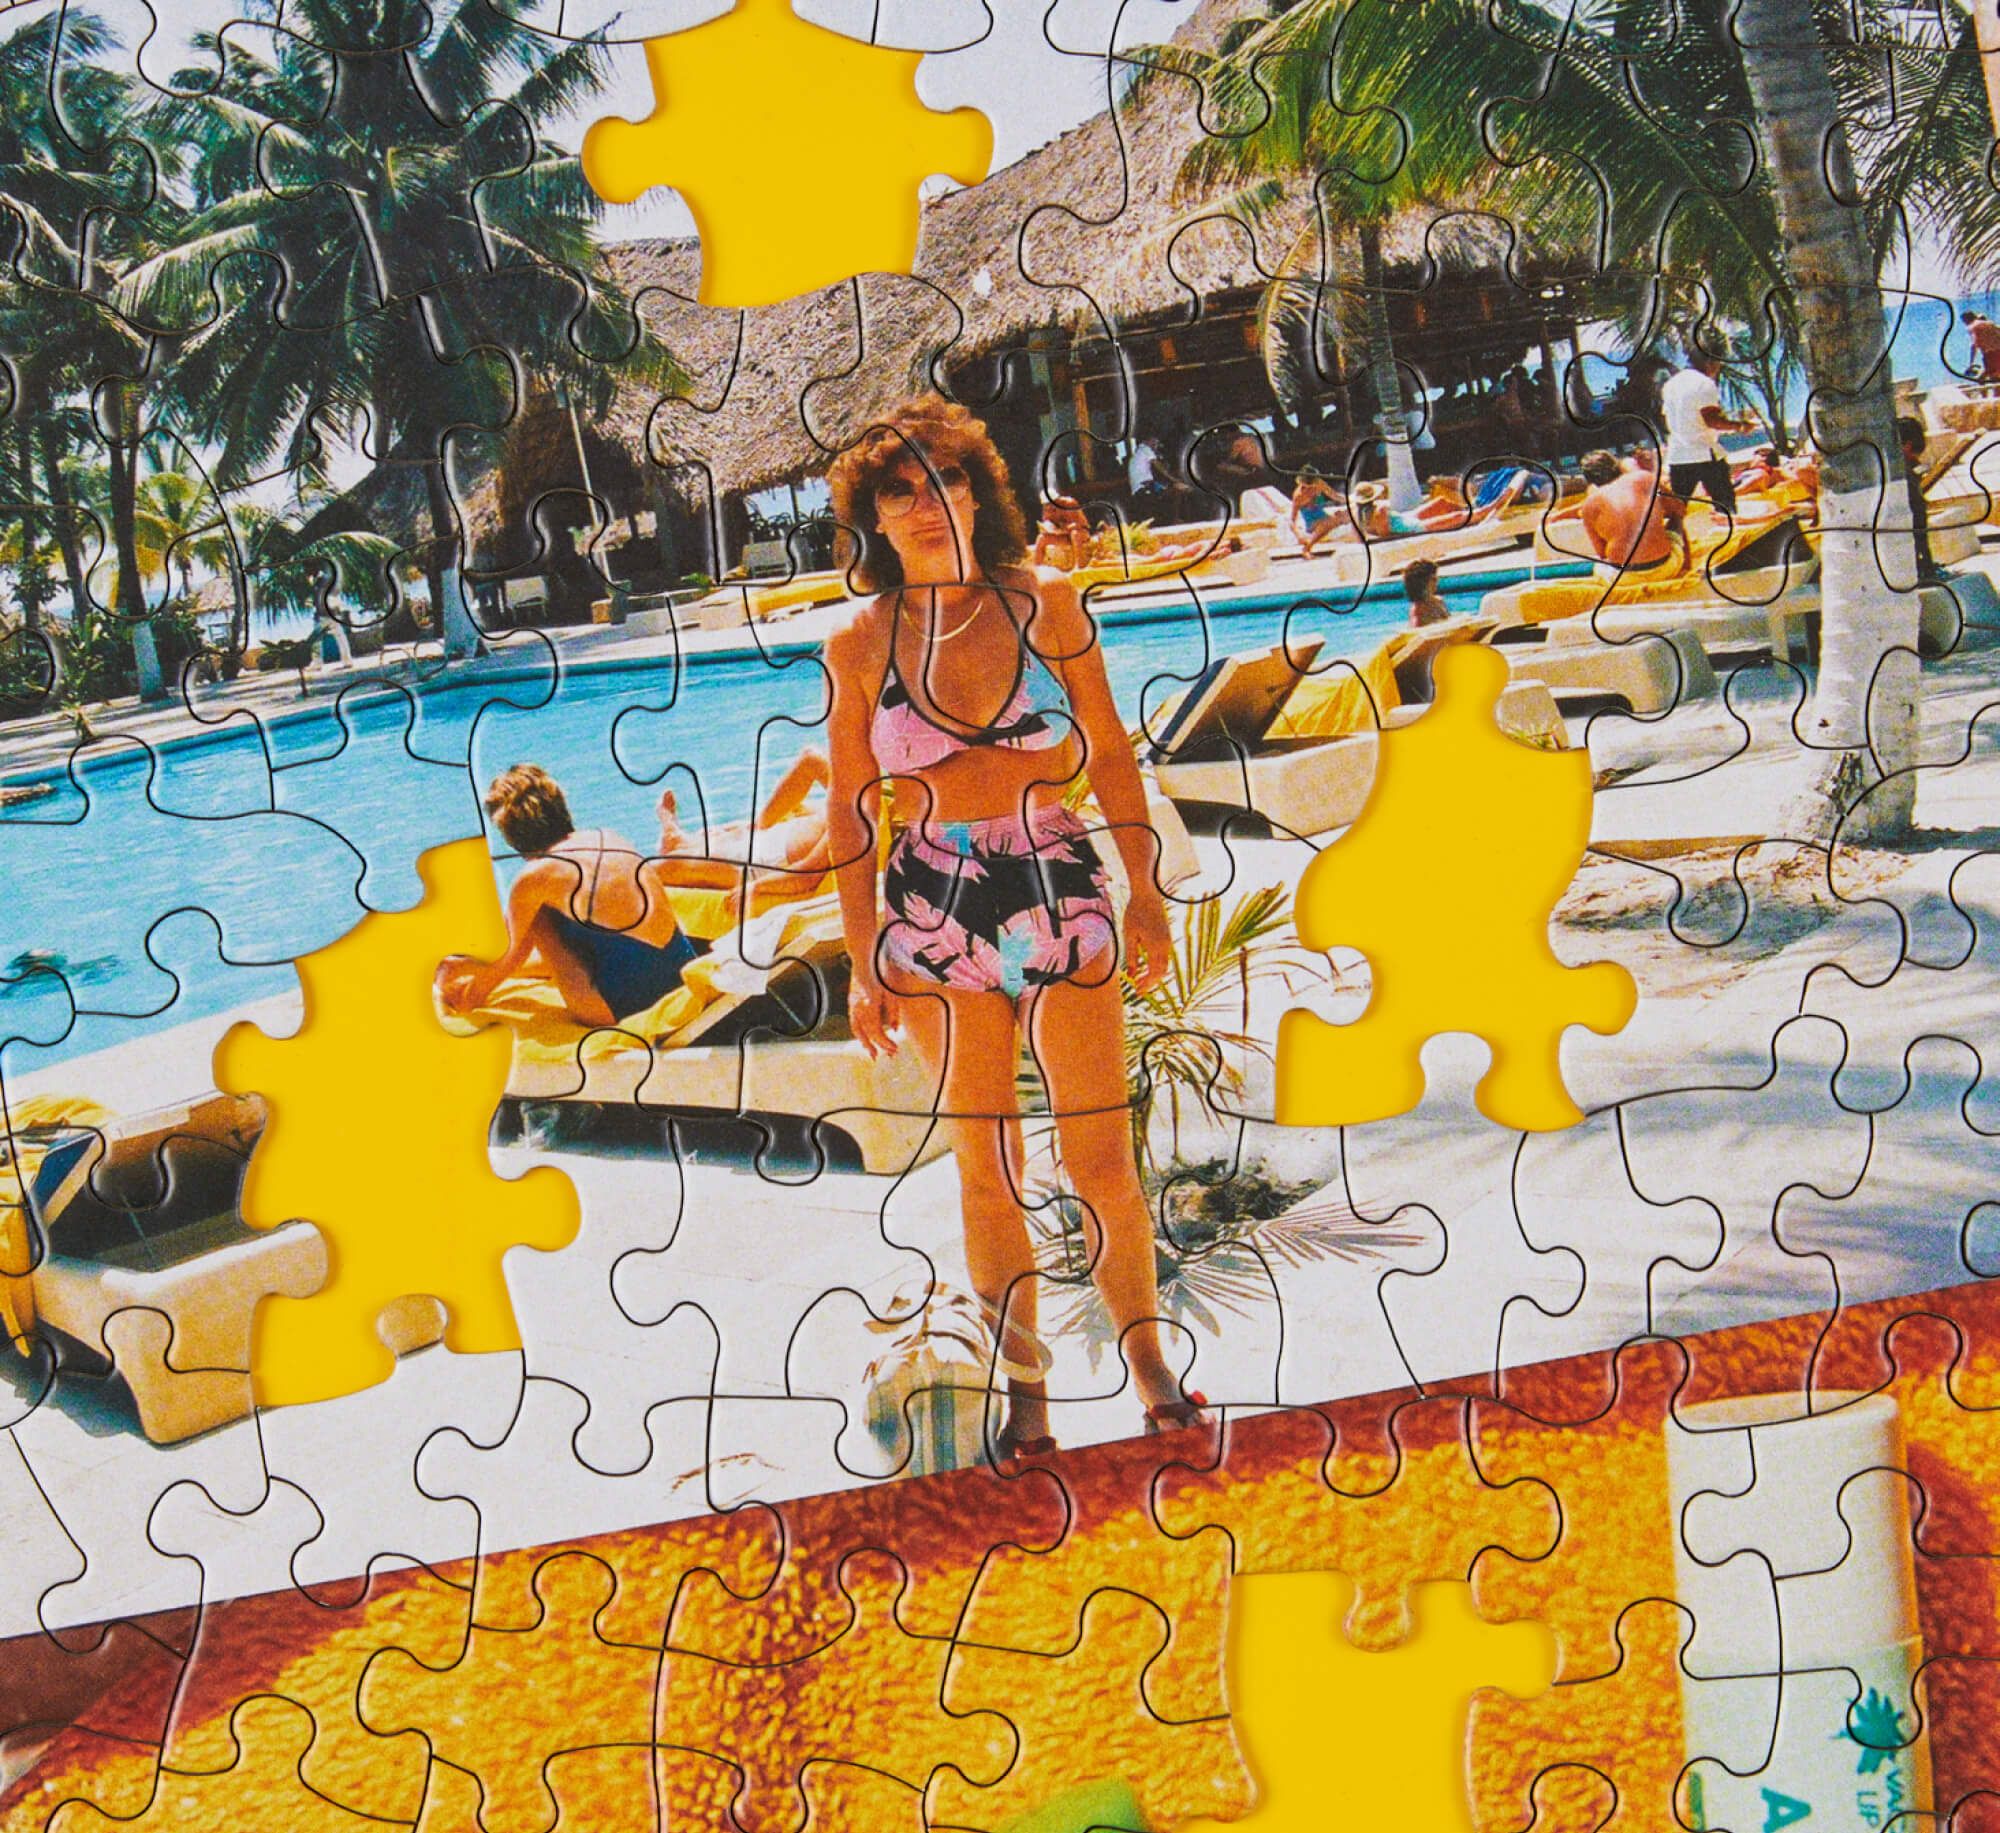 Vacation” by Zebu, a limited edition puzzle from the Sulo brand